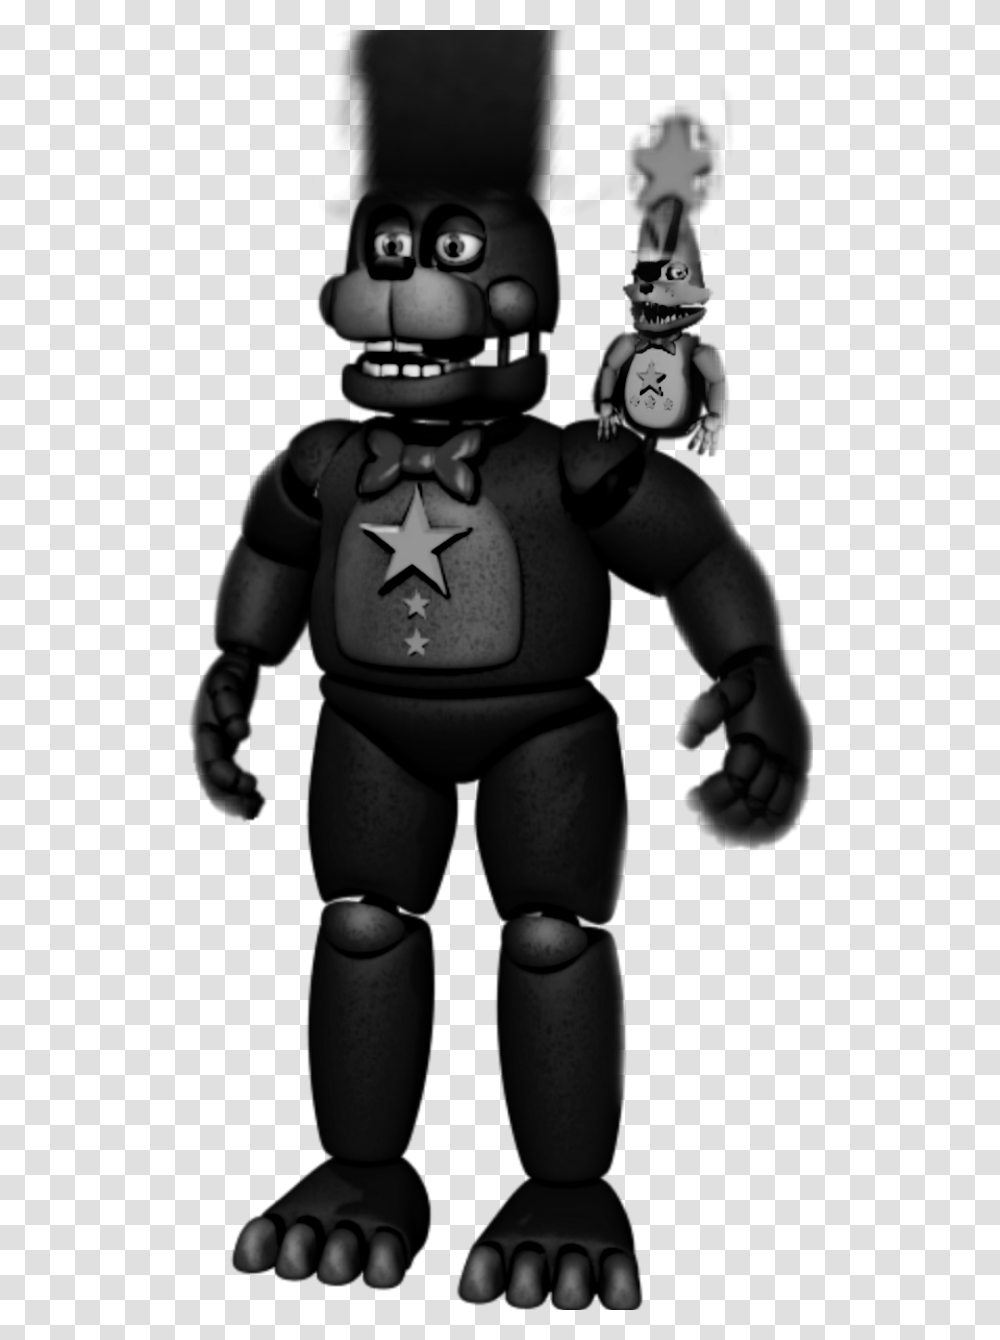 Five Nights At Freddy's Rockstar Freddy, Toy, Figurine, Robot, Hand Transparent Png